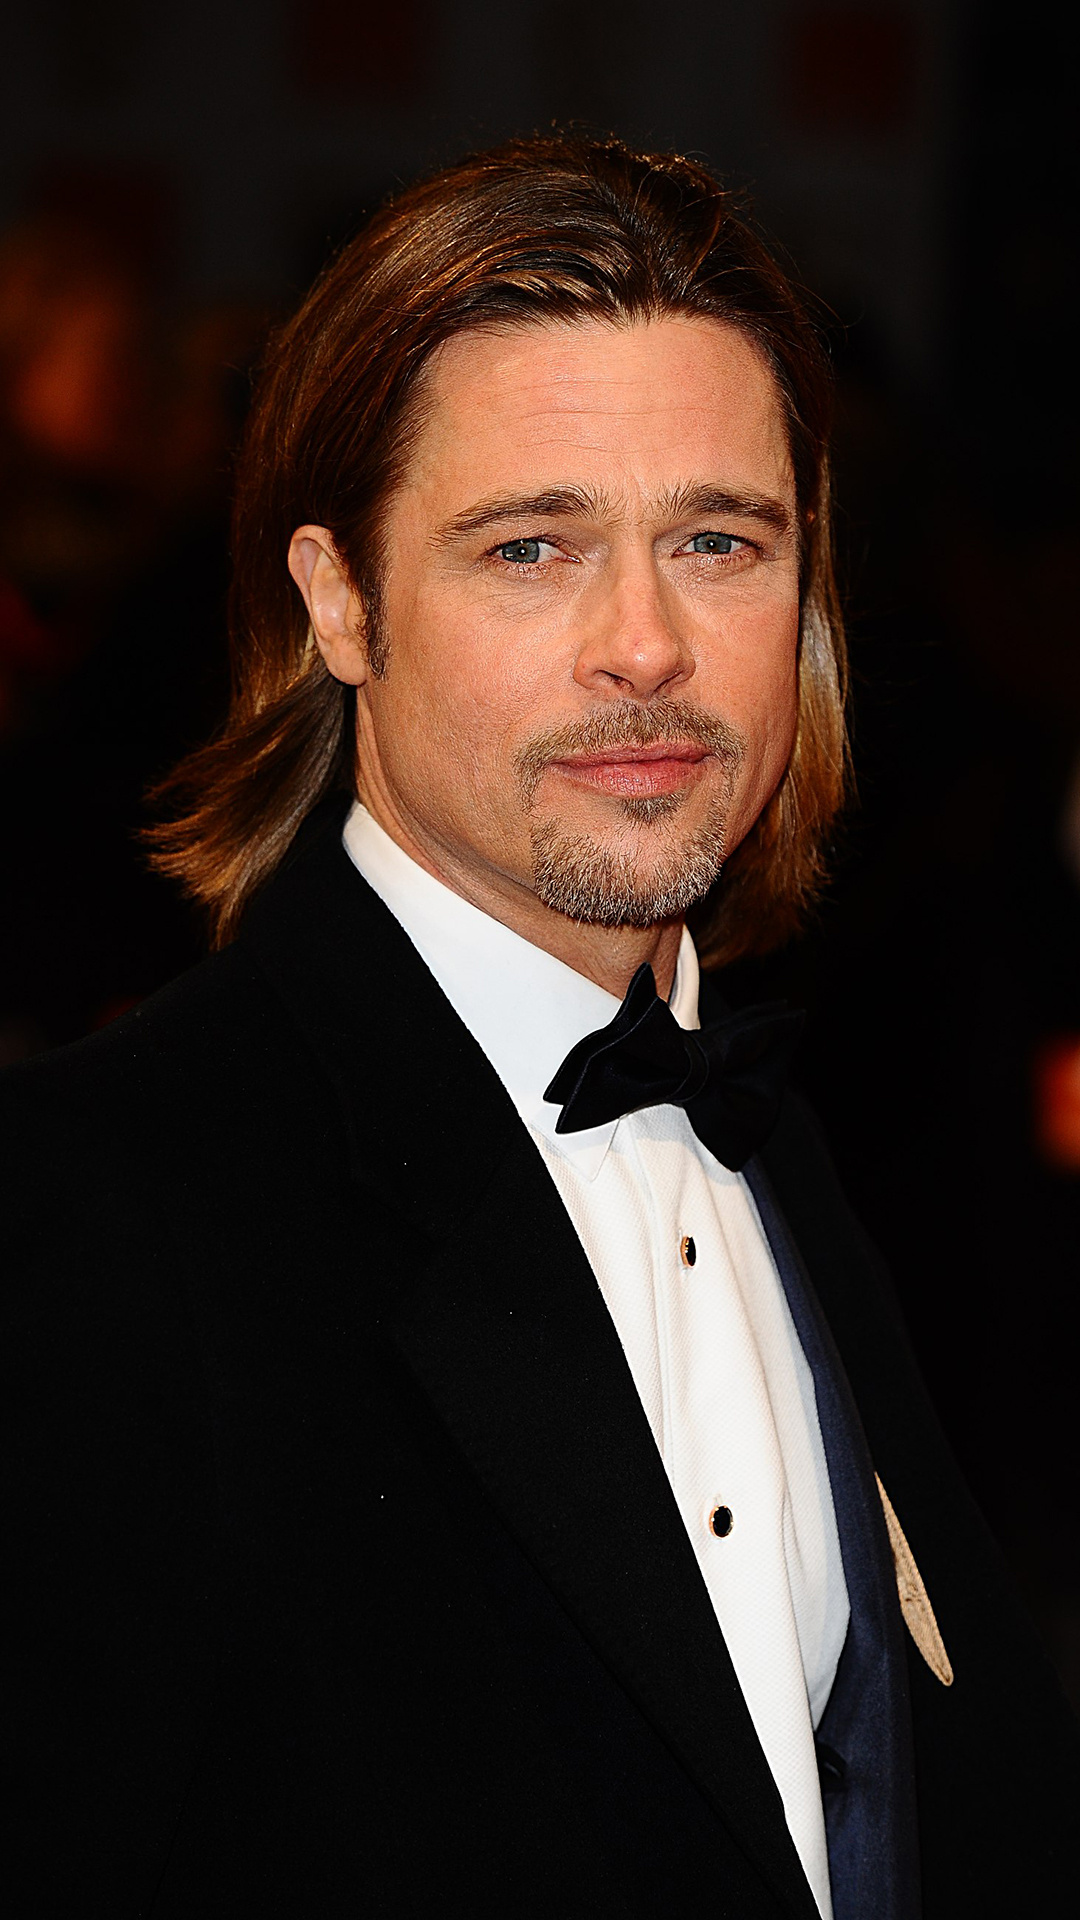 Brad Pitt: American actor and producer, The Ocean's franchise. 1080x1920 Full HD Wallpaper.